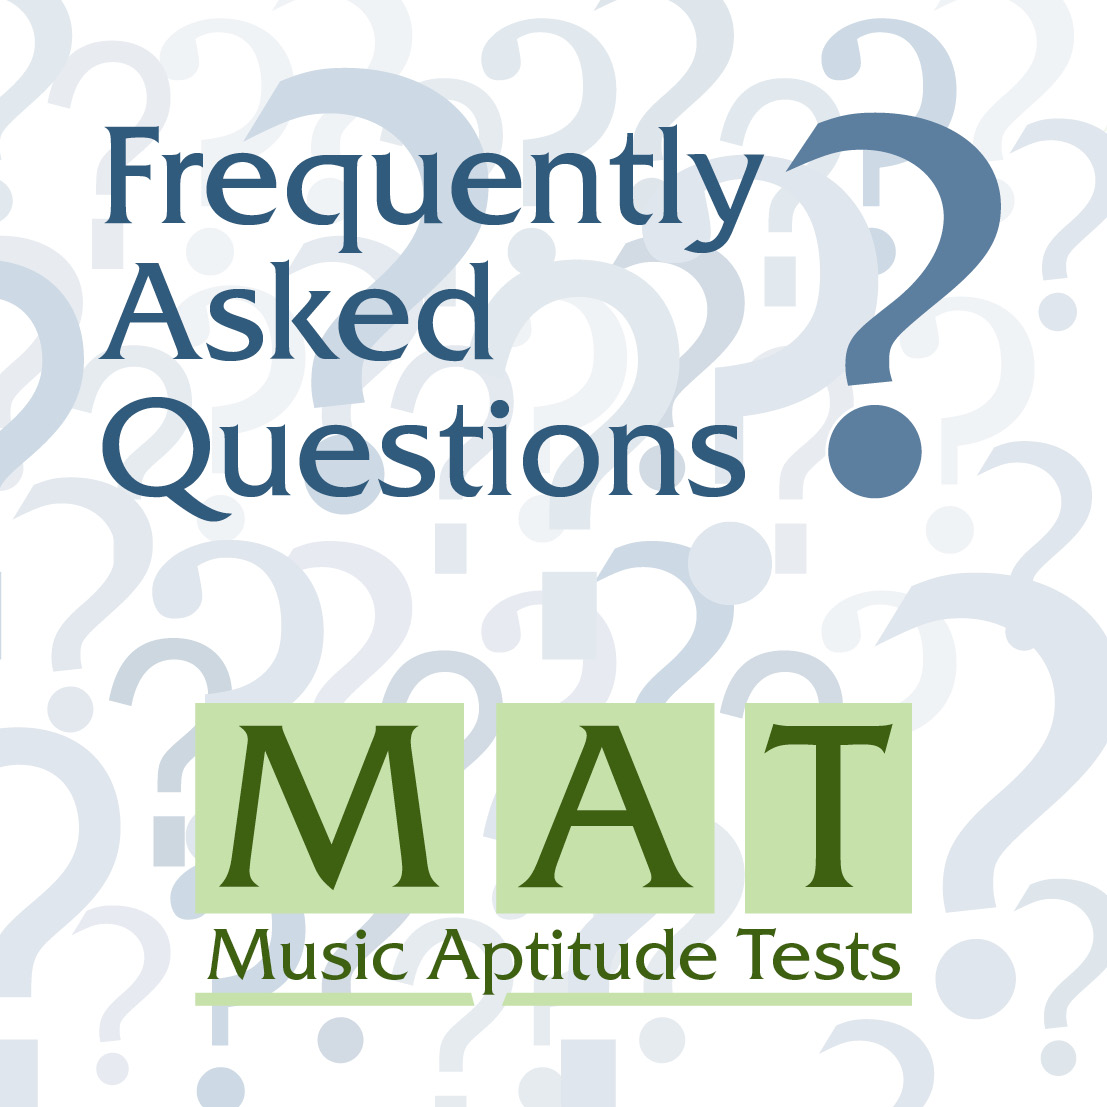 music-test-frequently-asked-questions-faqs-for-uk-schools